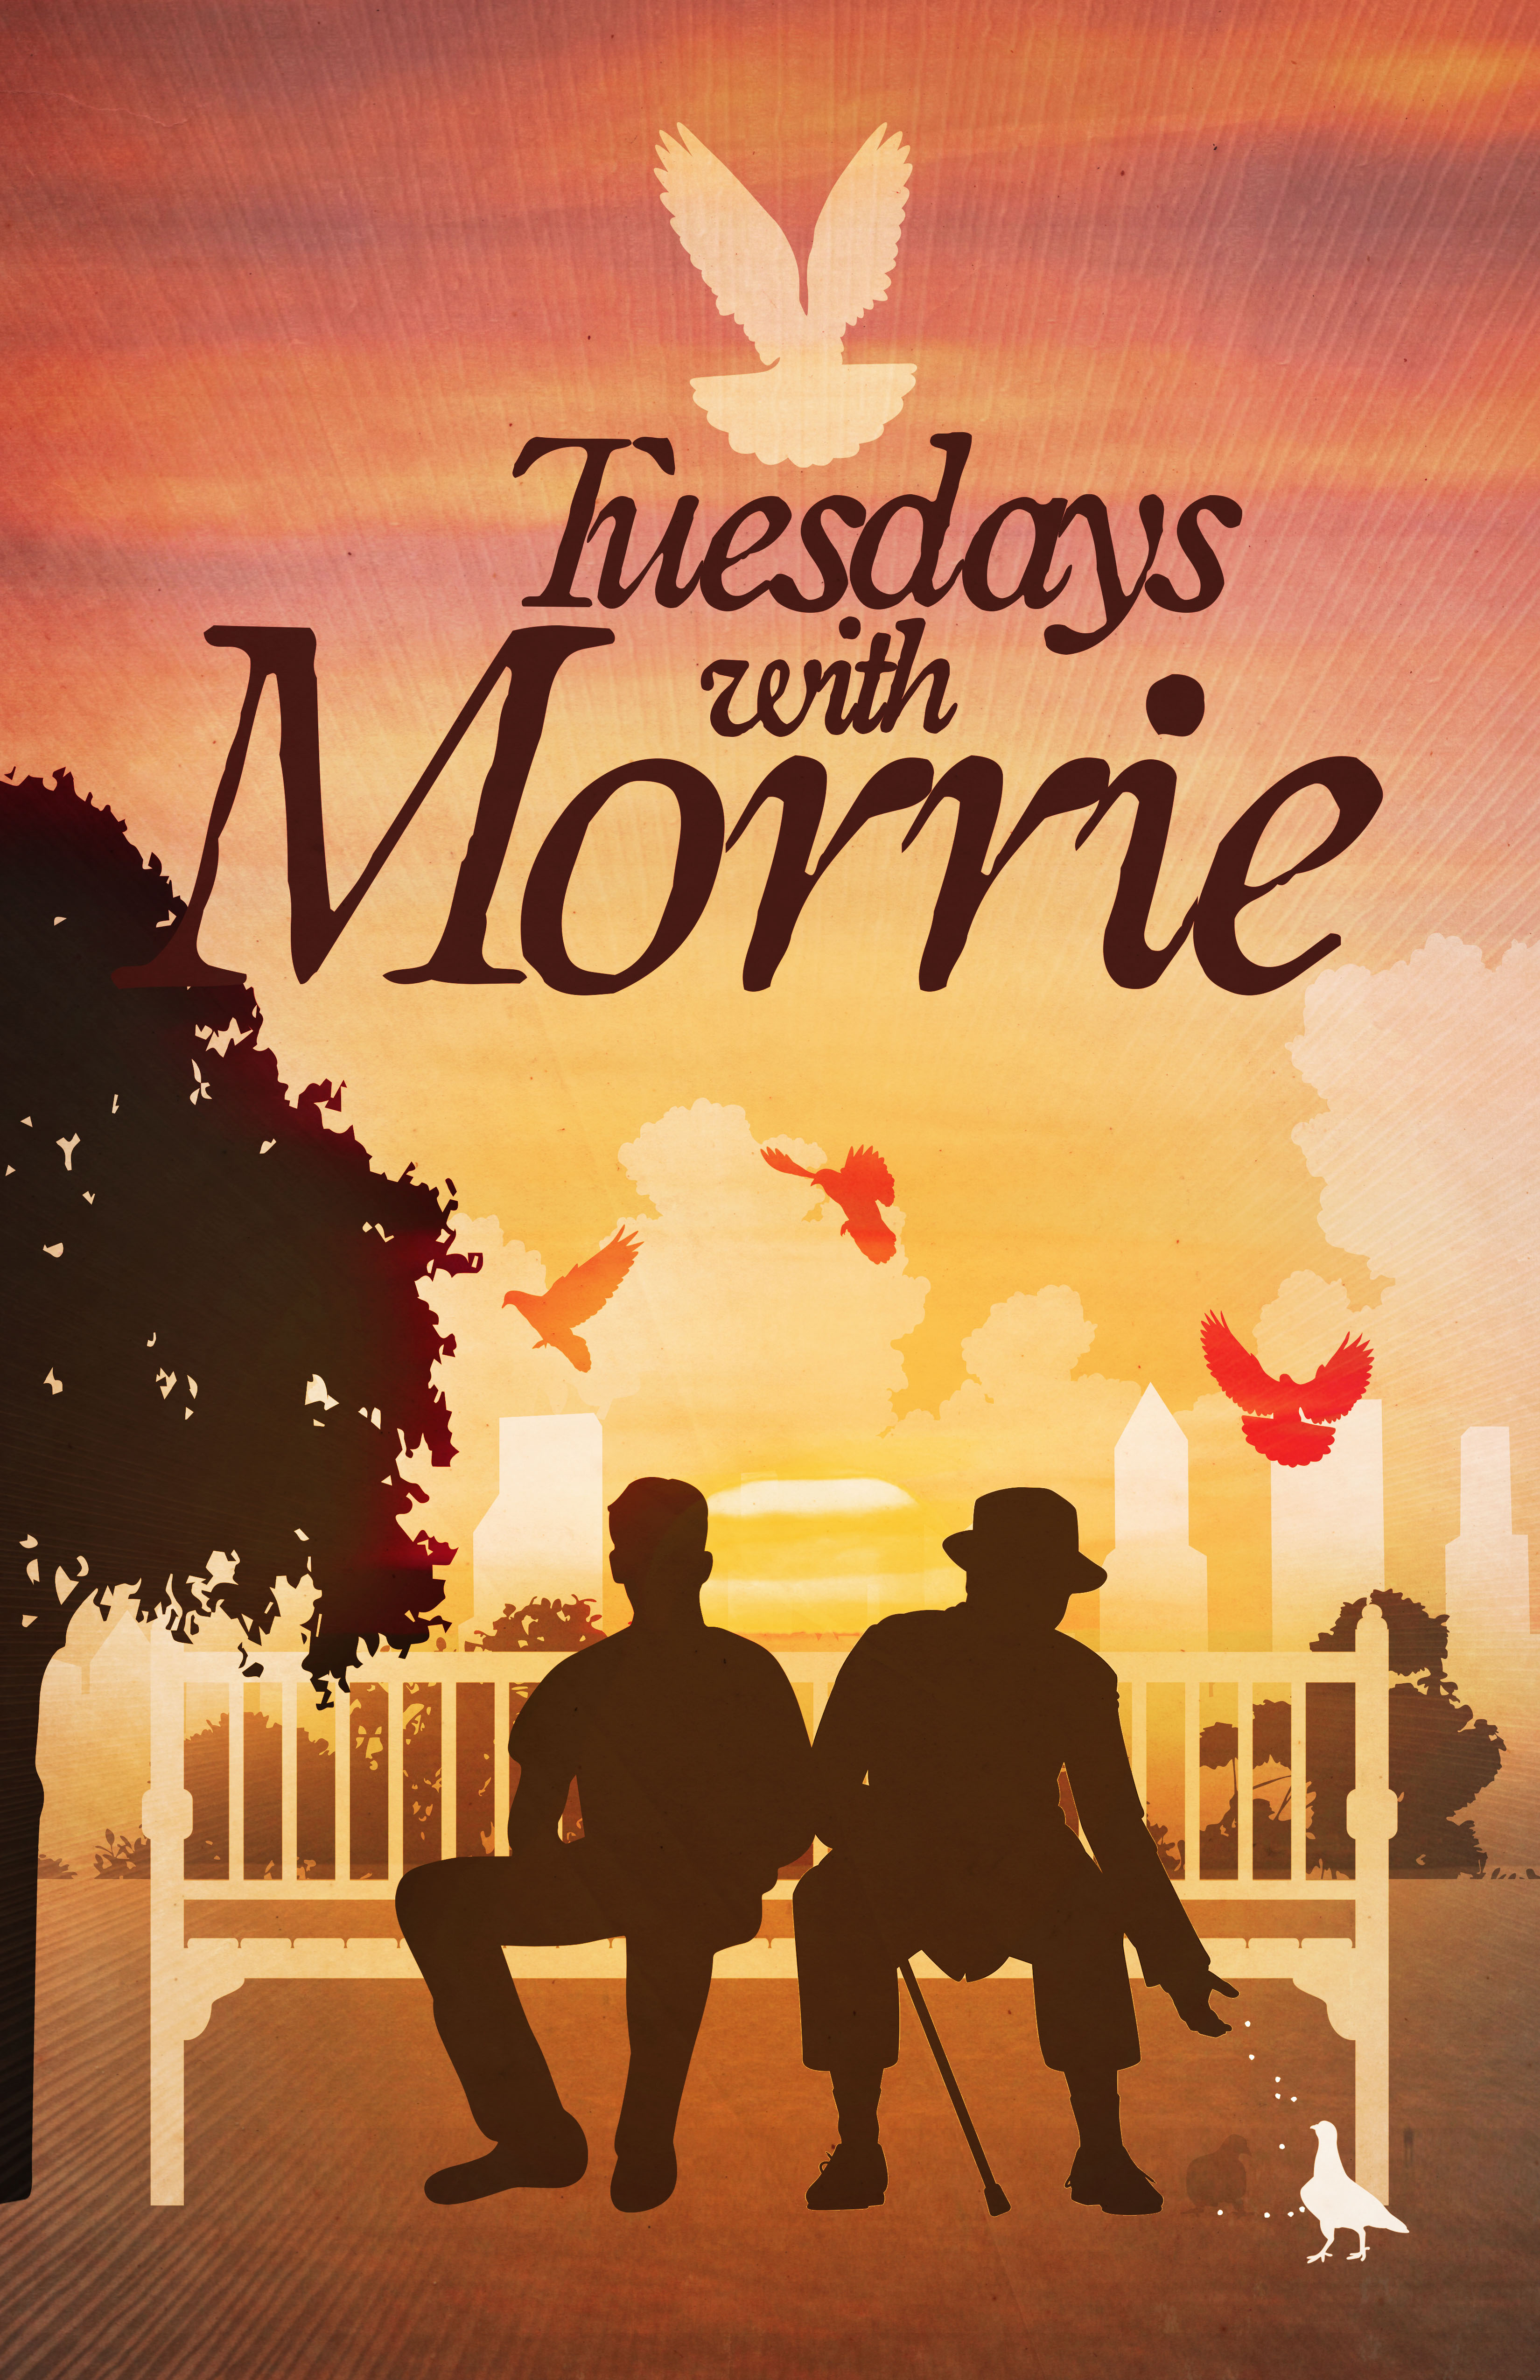 tuesdays with morrie amazon